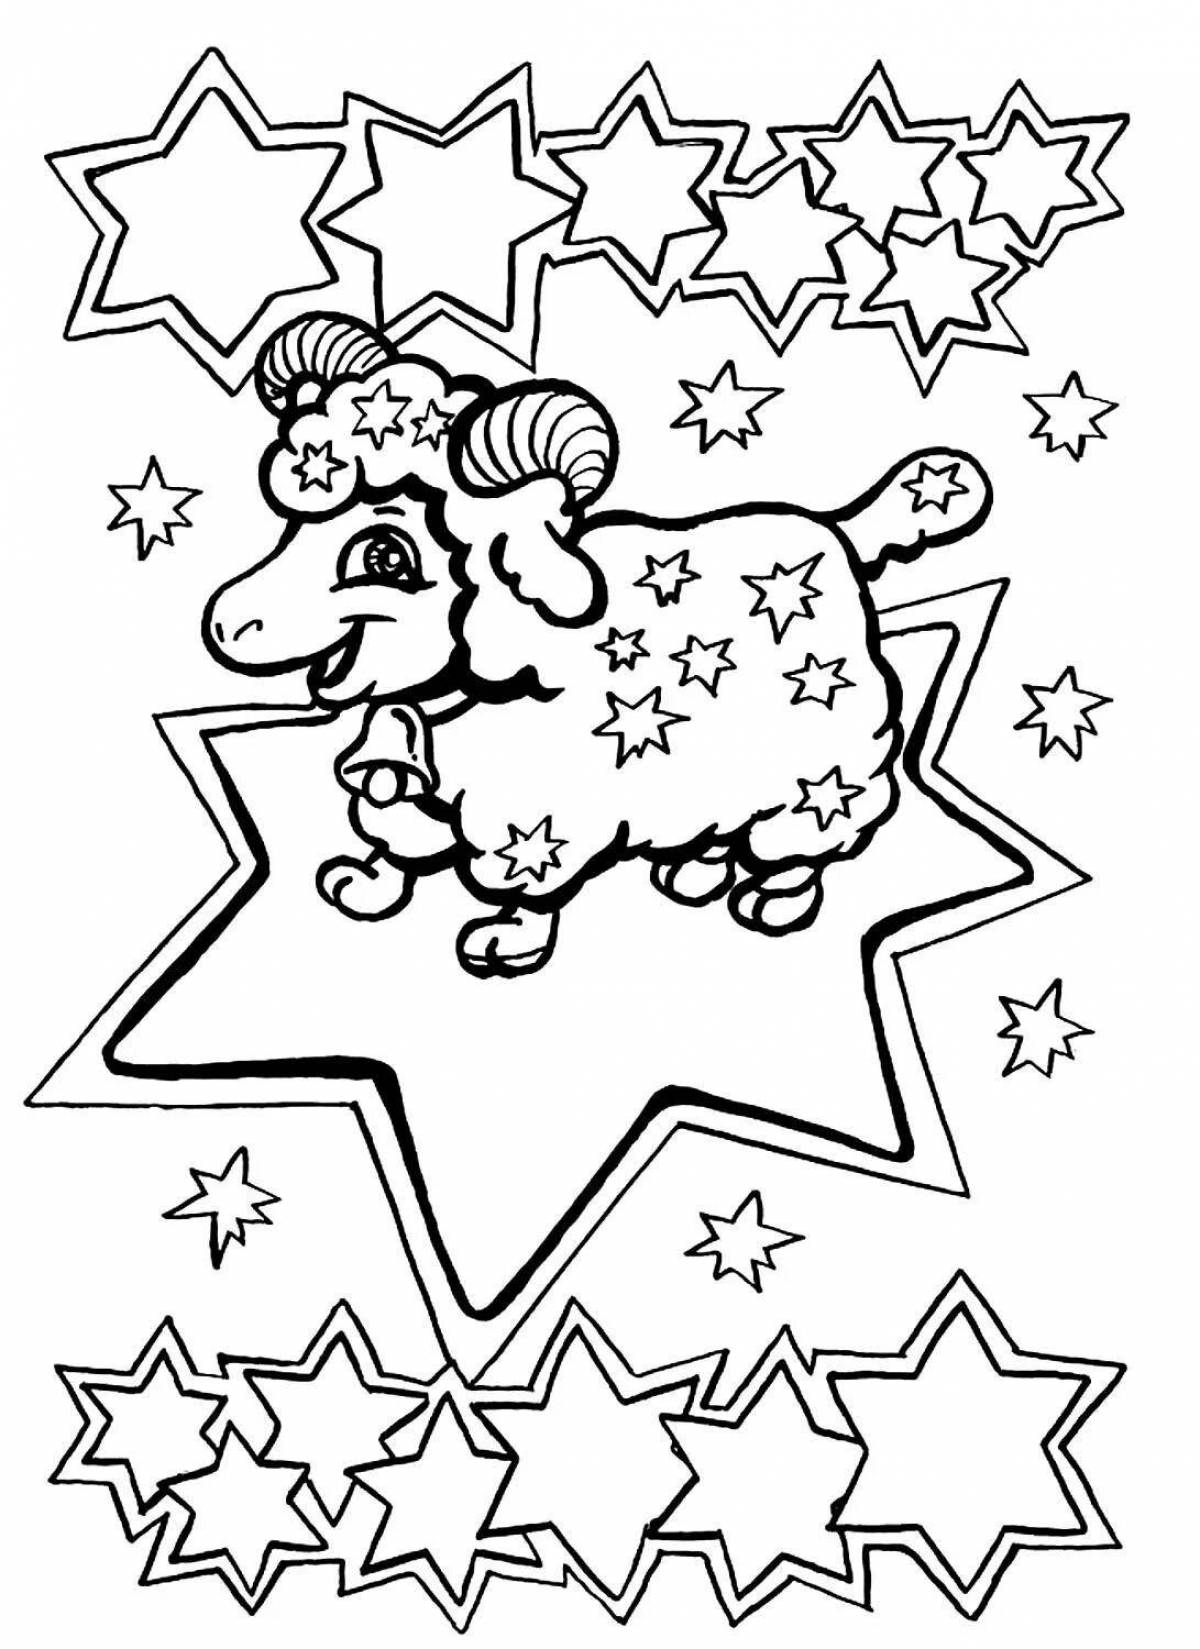 Coloring pages of the bright signs of the zodiac for children